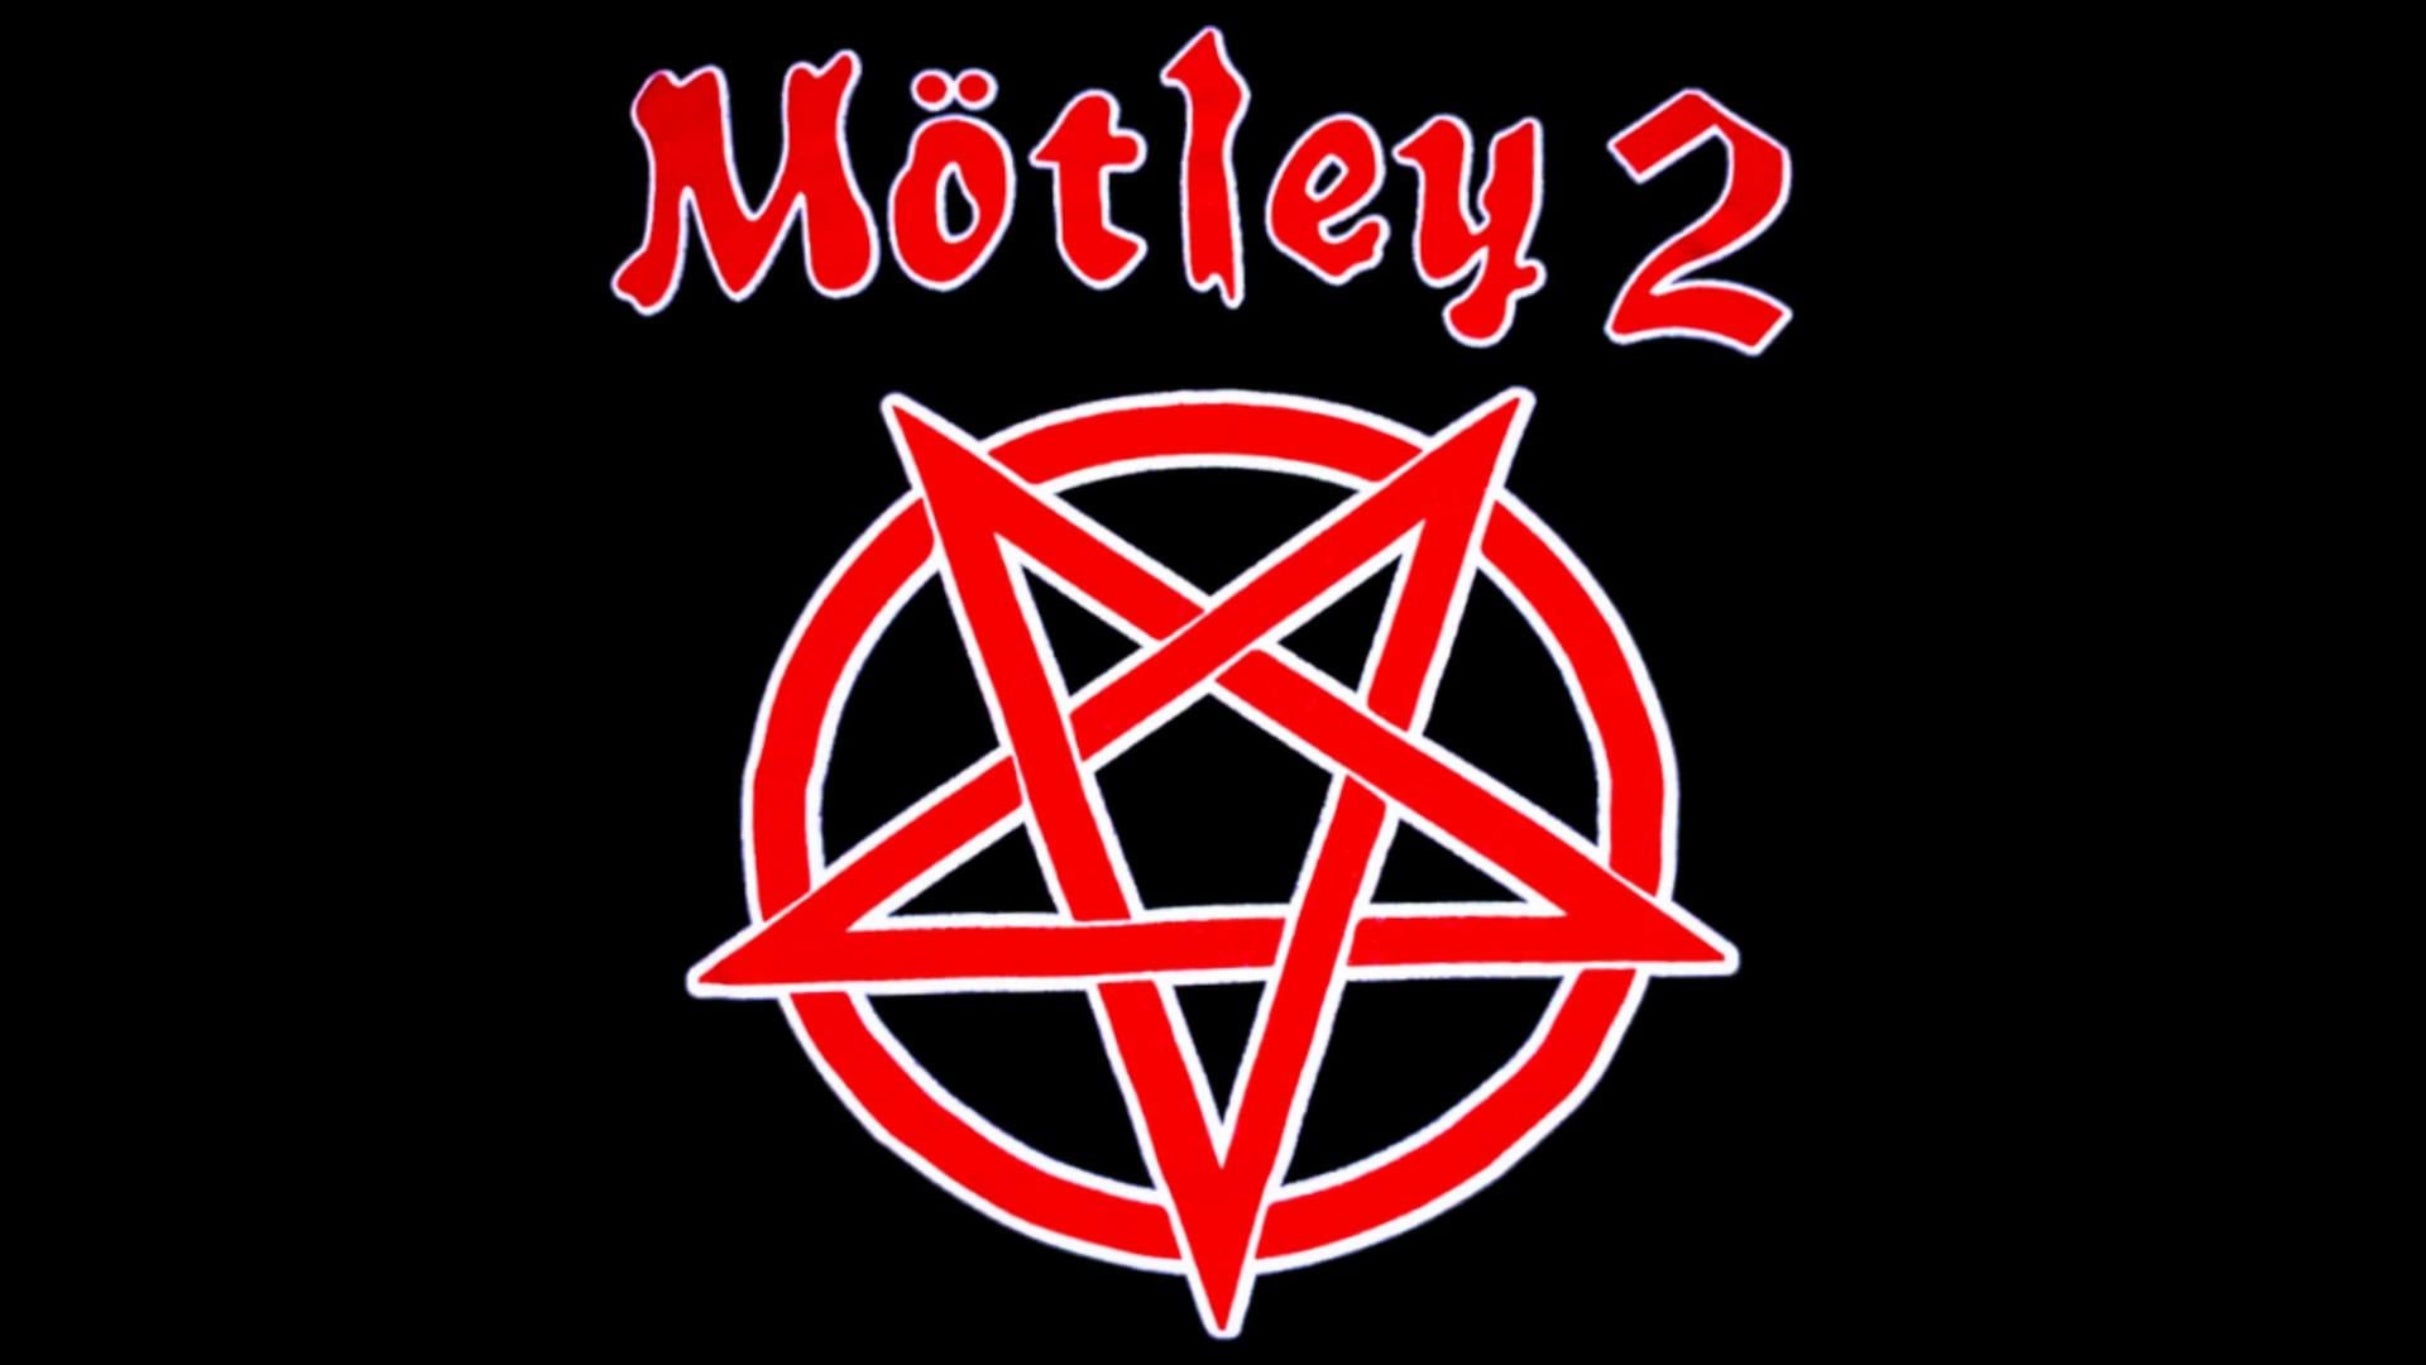 Motley 2 : A Tribute to Motley Crue in Louisville promo photo for HOB Foundation Room Member presale offer code